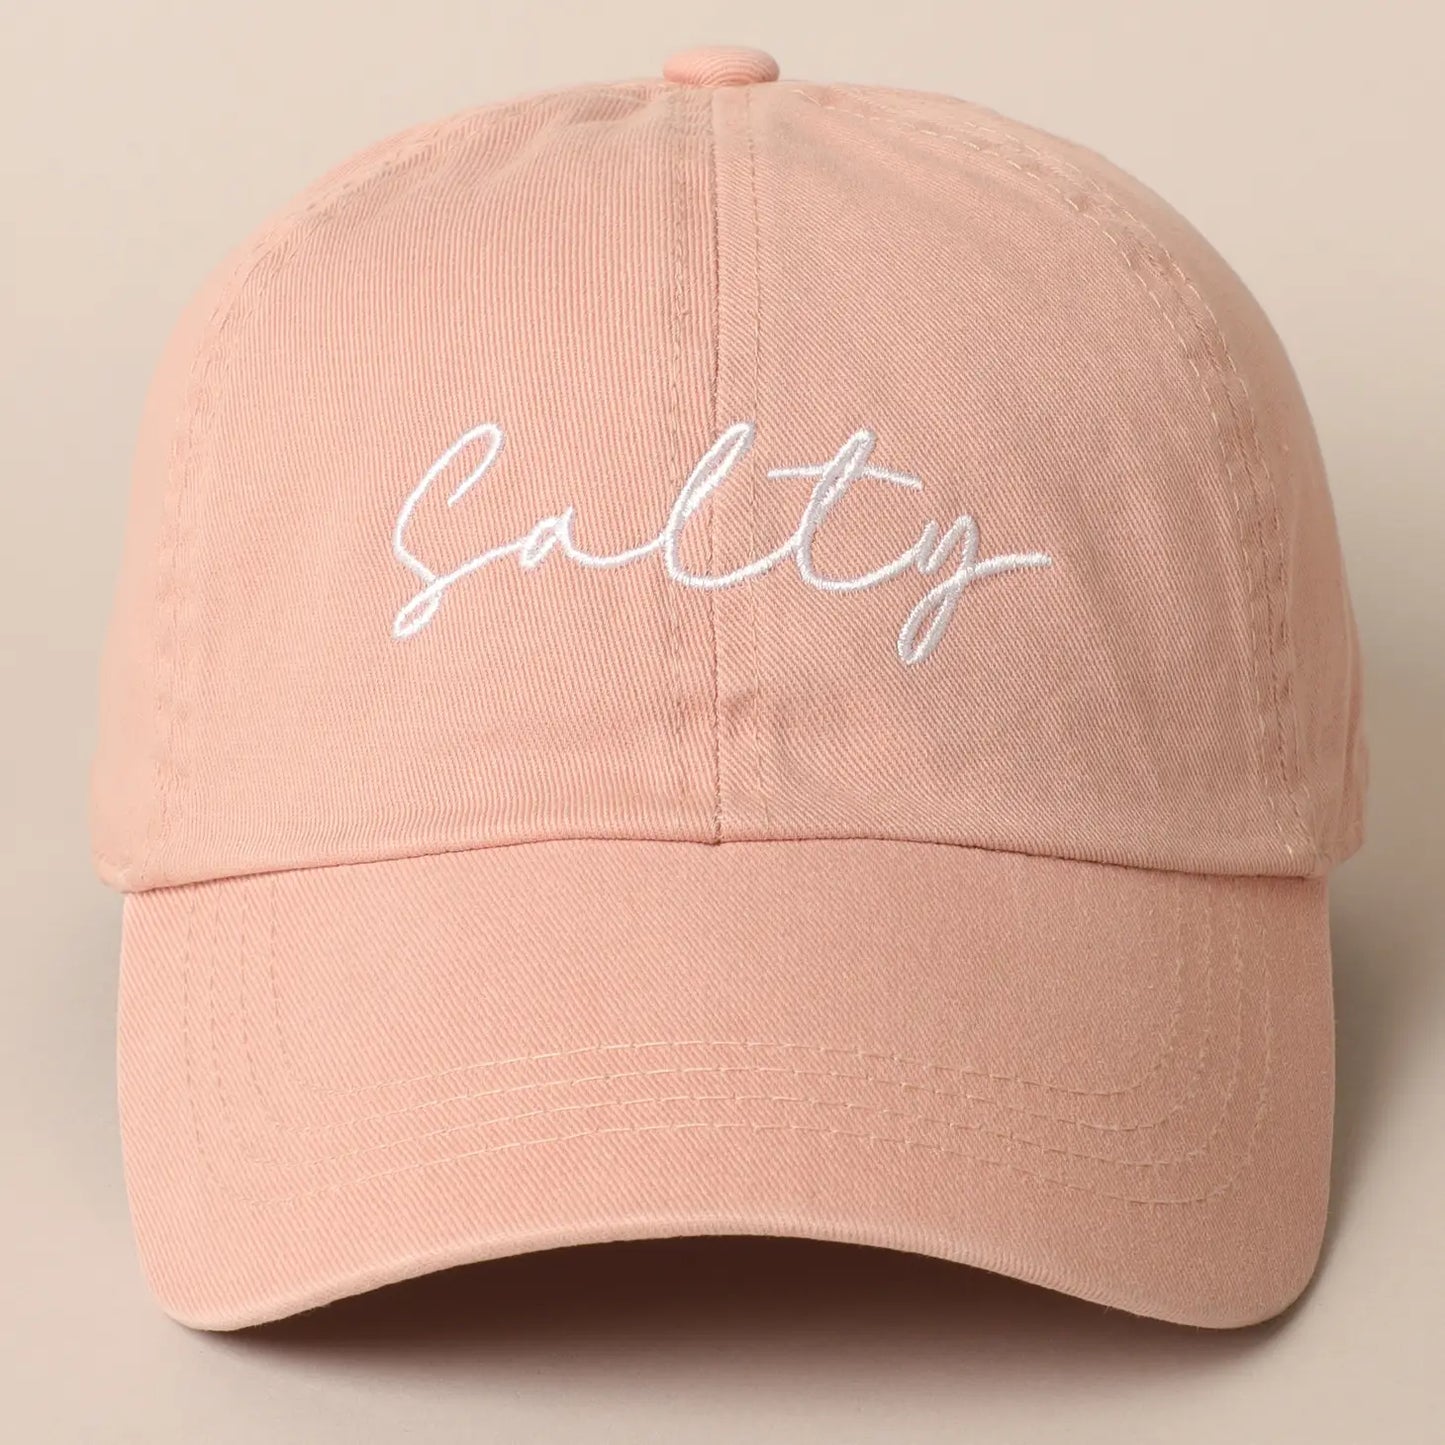 Salty Lettering Embroidery Adjustable Strap Baseball Cap-Dusty Pink